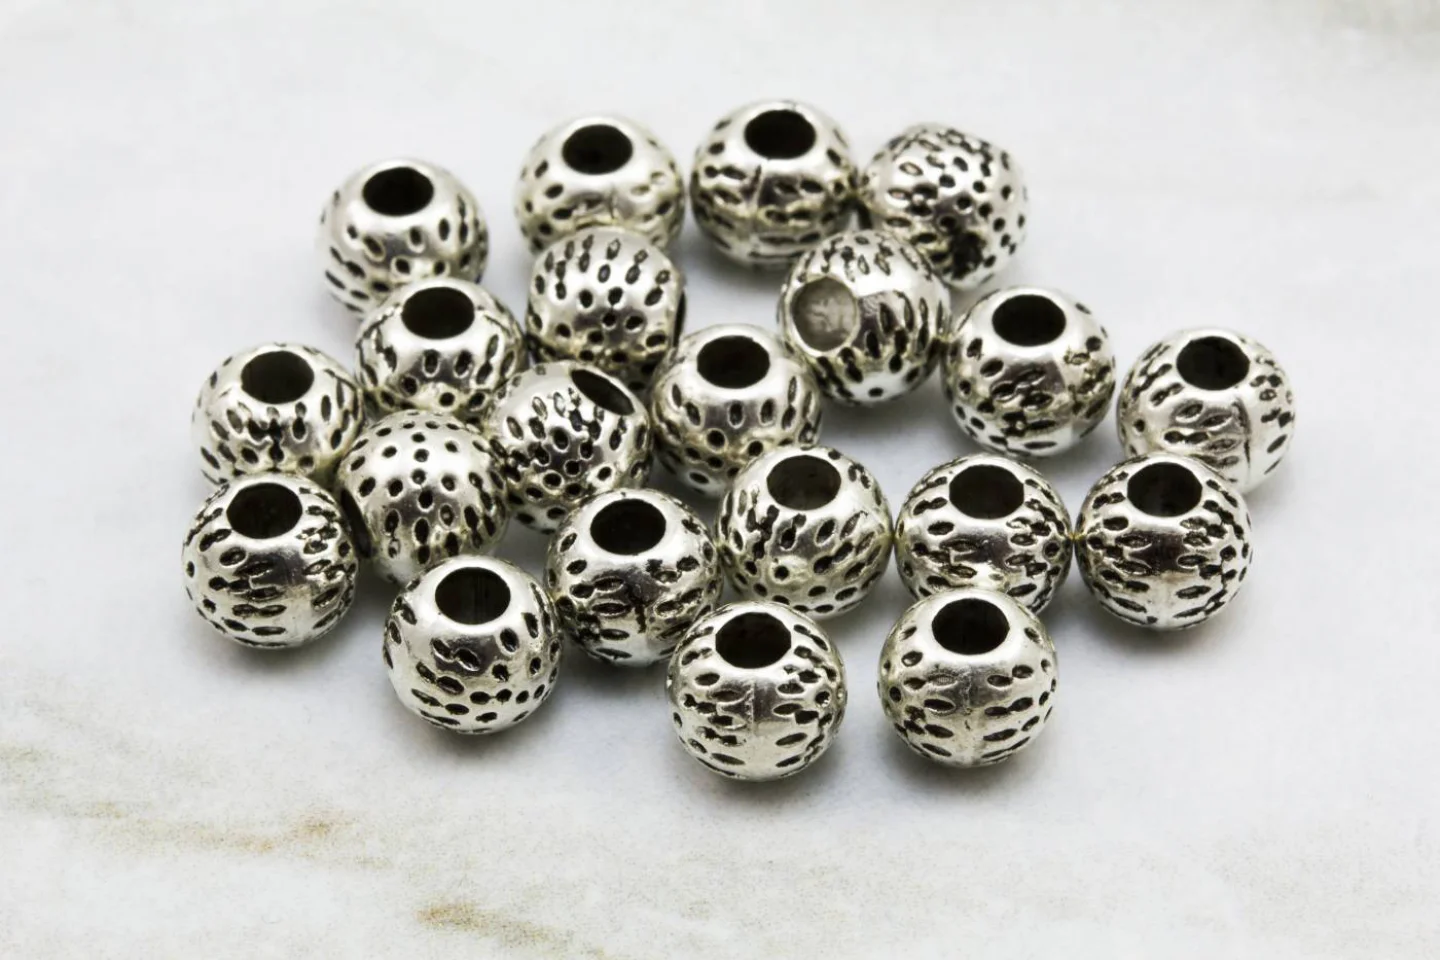 7mm-metal-round-ball-silver-spacer-beads.